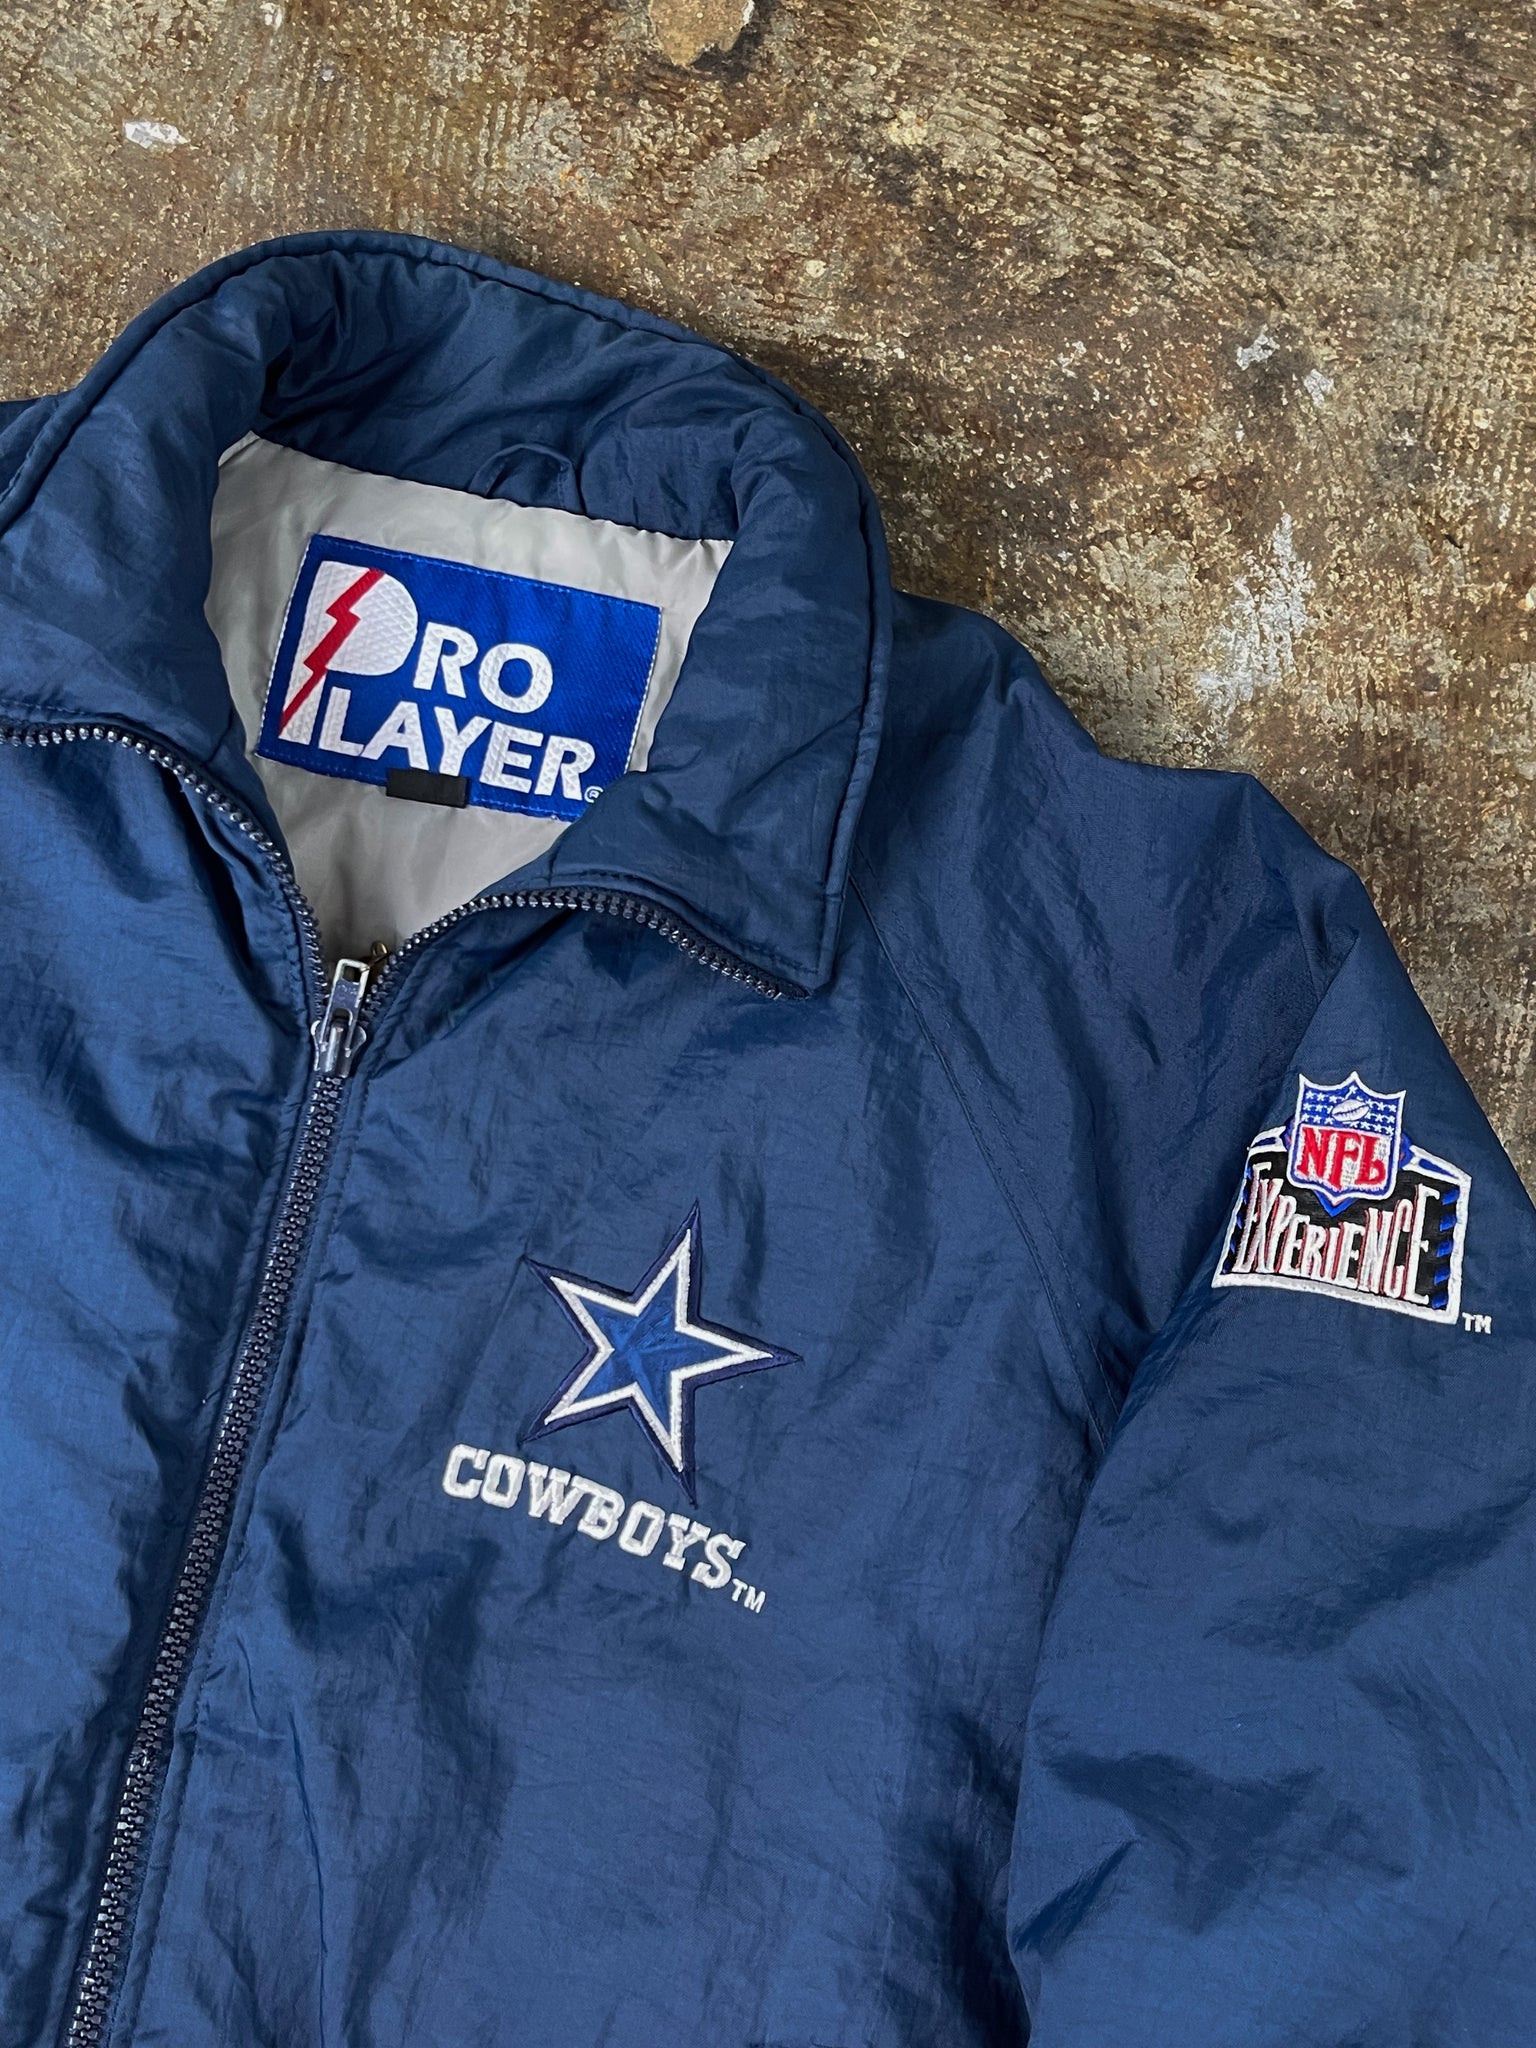 COWBOYS PRO PLAYER PUFFERED JACKET